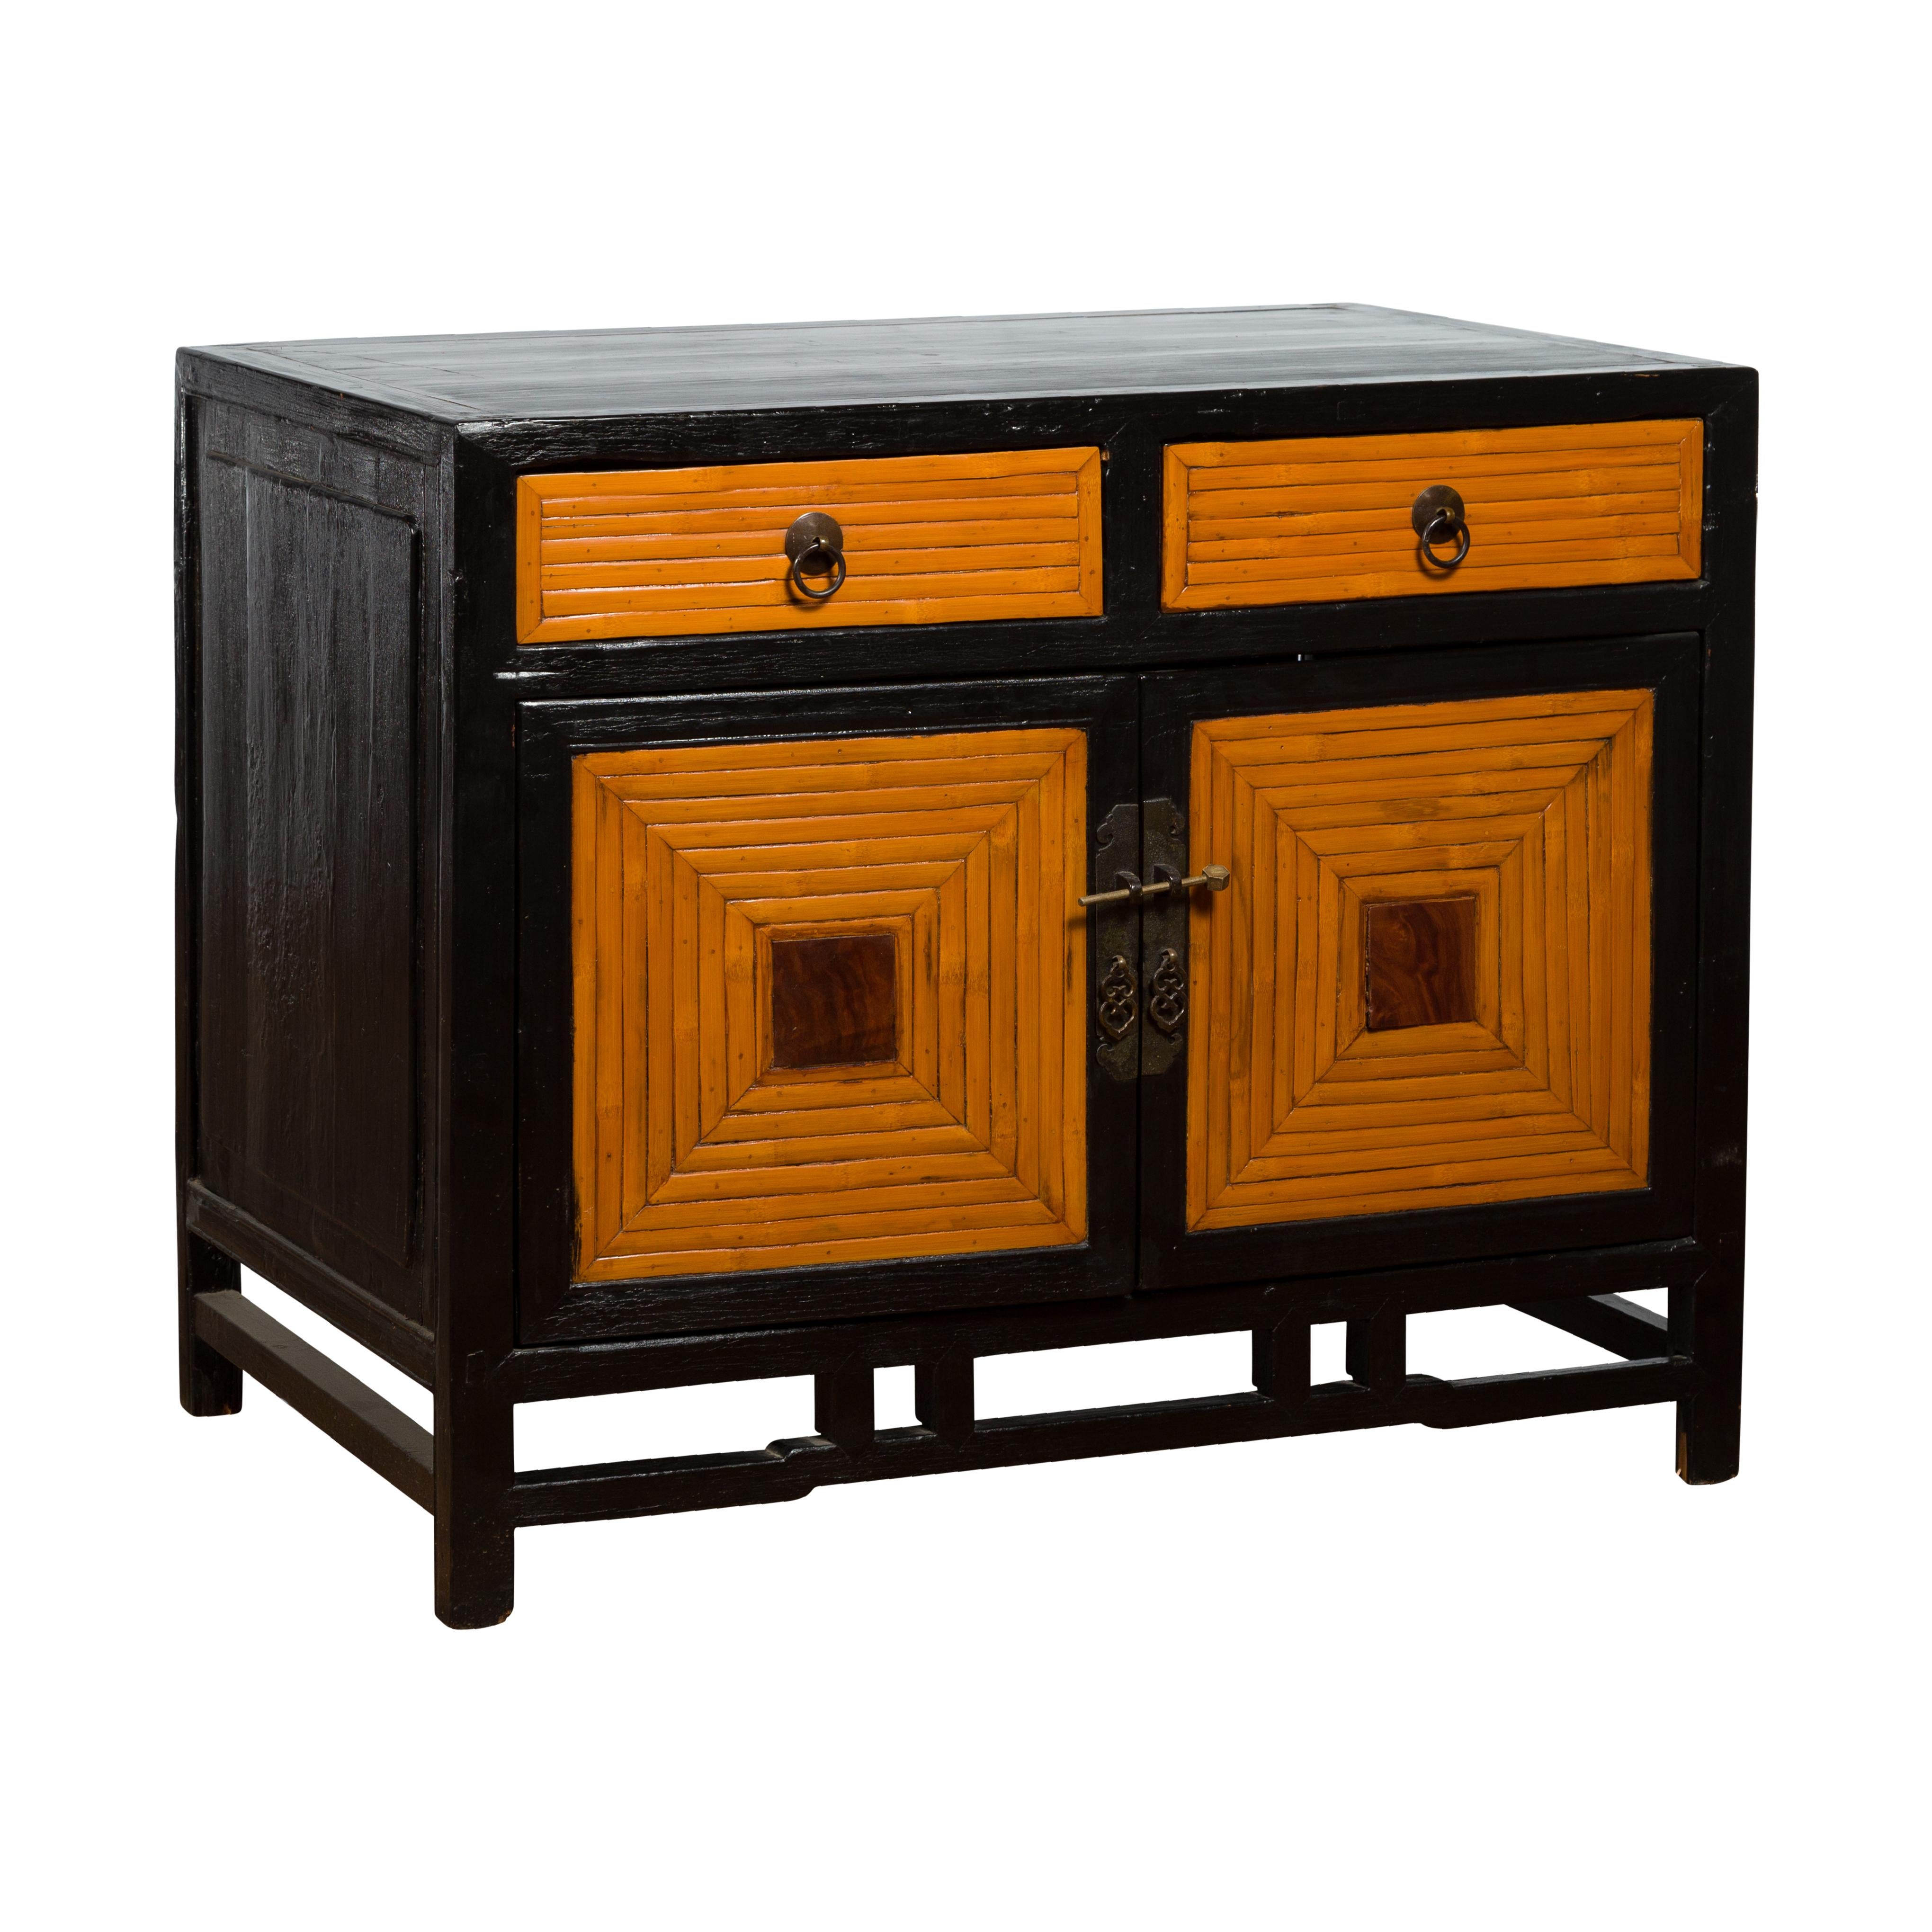 Chinese 1930s Art Deco Black Lacquer Two-Toned Side Cabinet with Bamboo Design For Sale 10